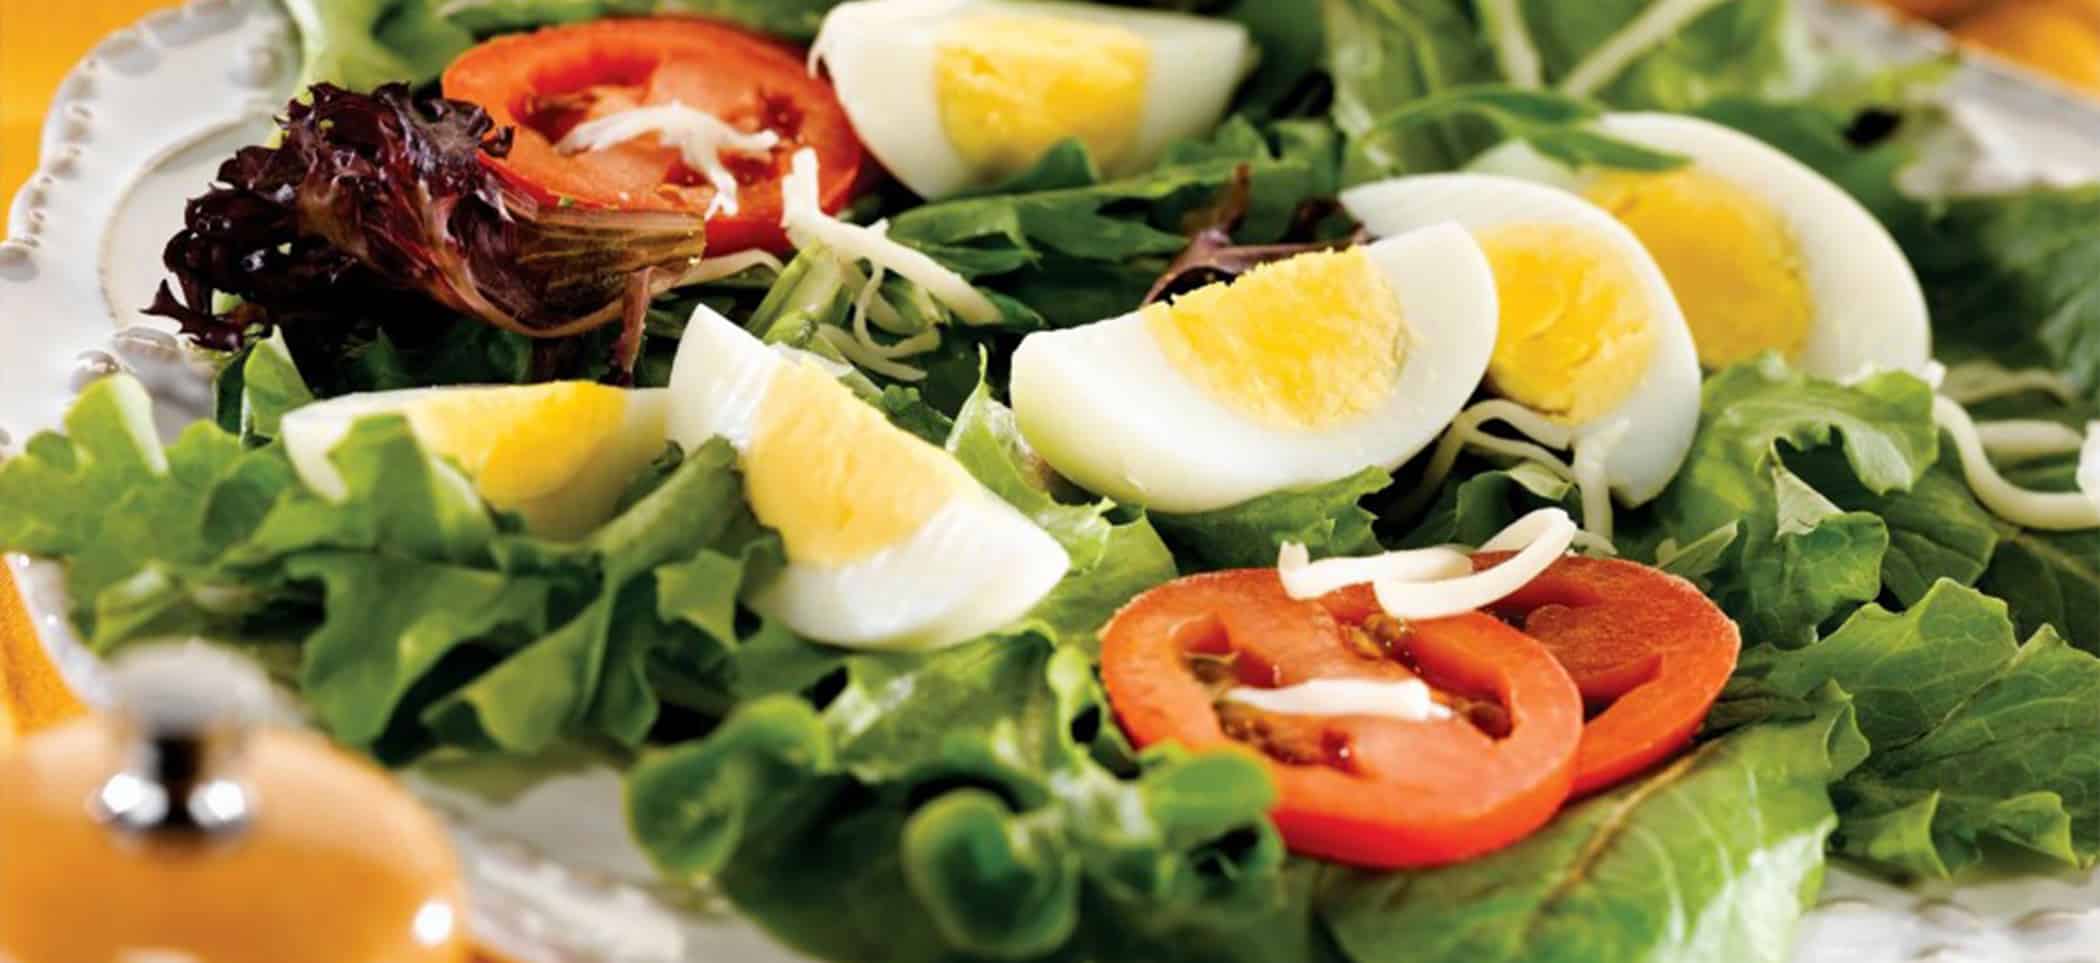 Mixed Greens Salad with Eggs